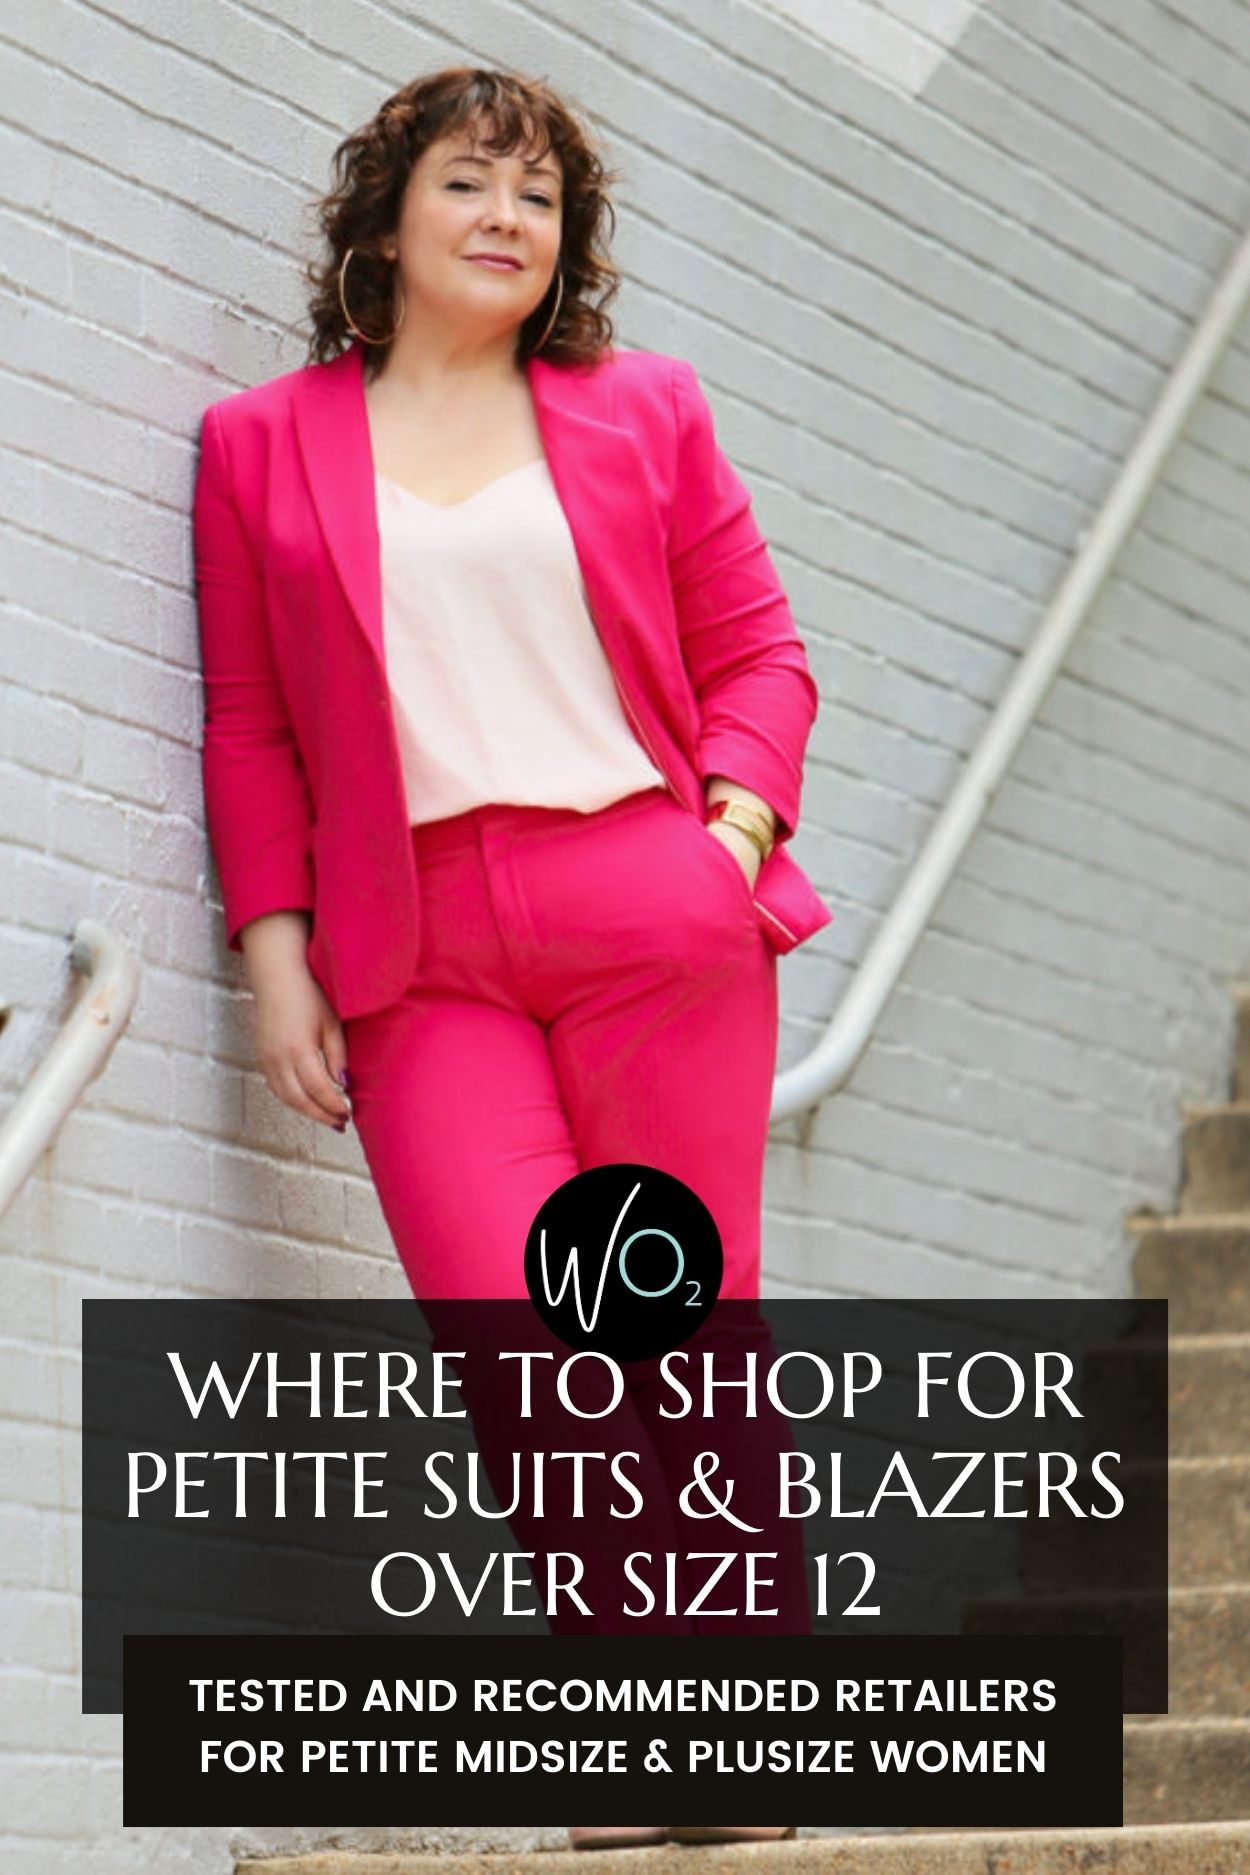 Women's Classic Career Suiting Pant Available in Regular and Petite 